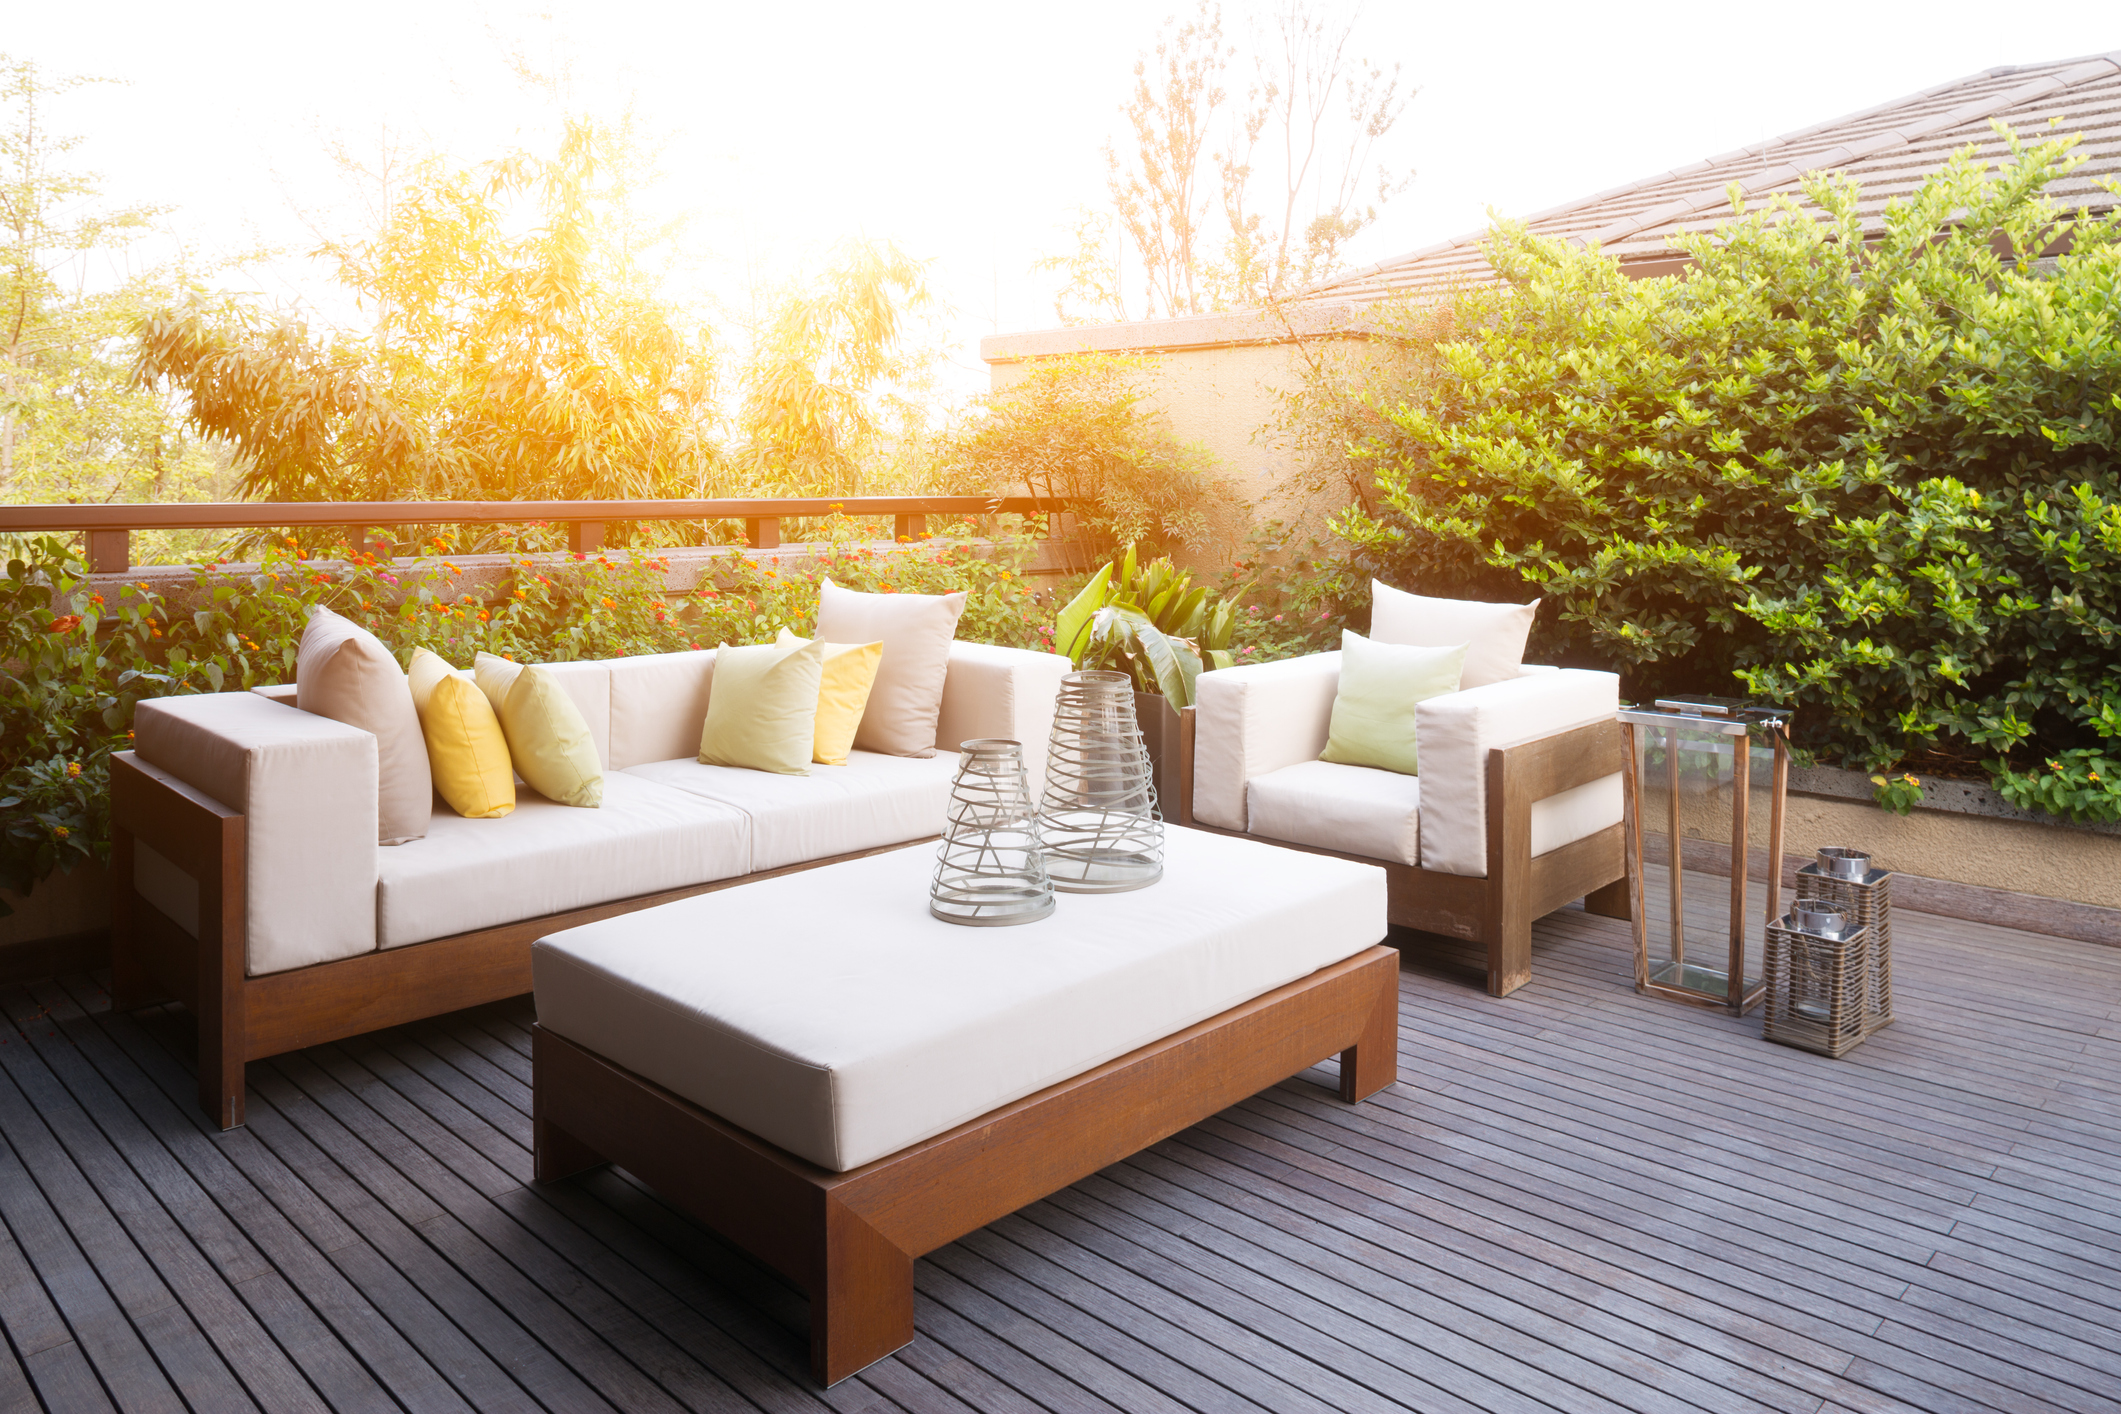 Upholstery for Patio Furniture